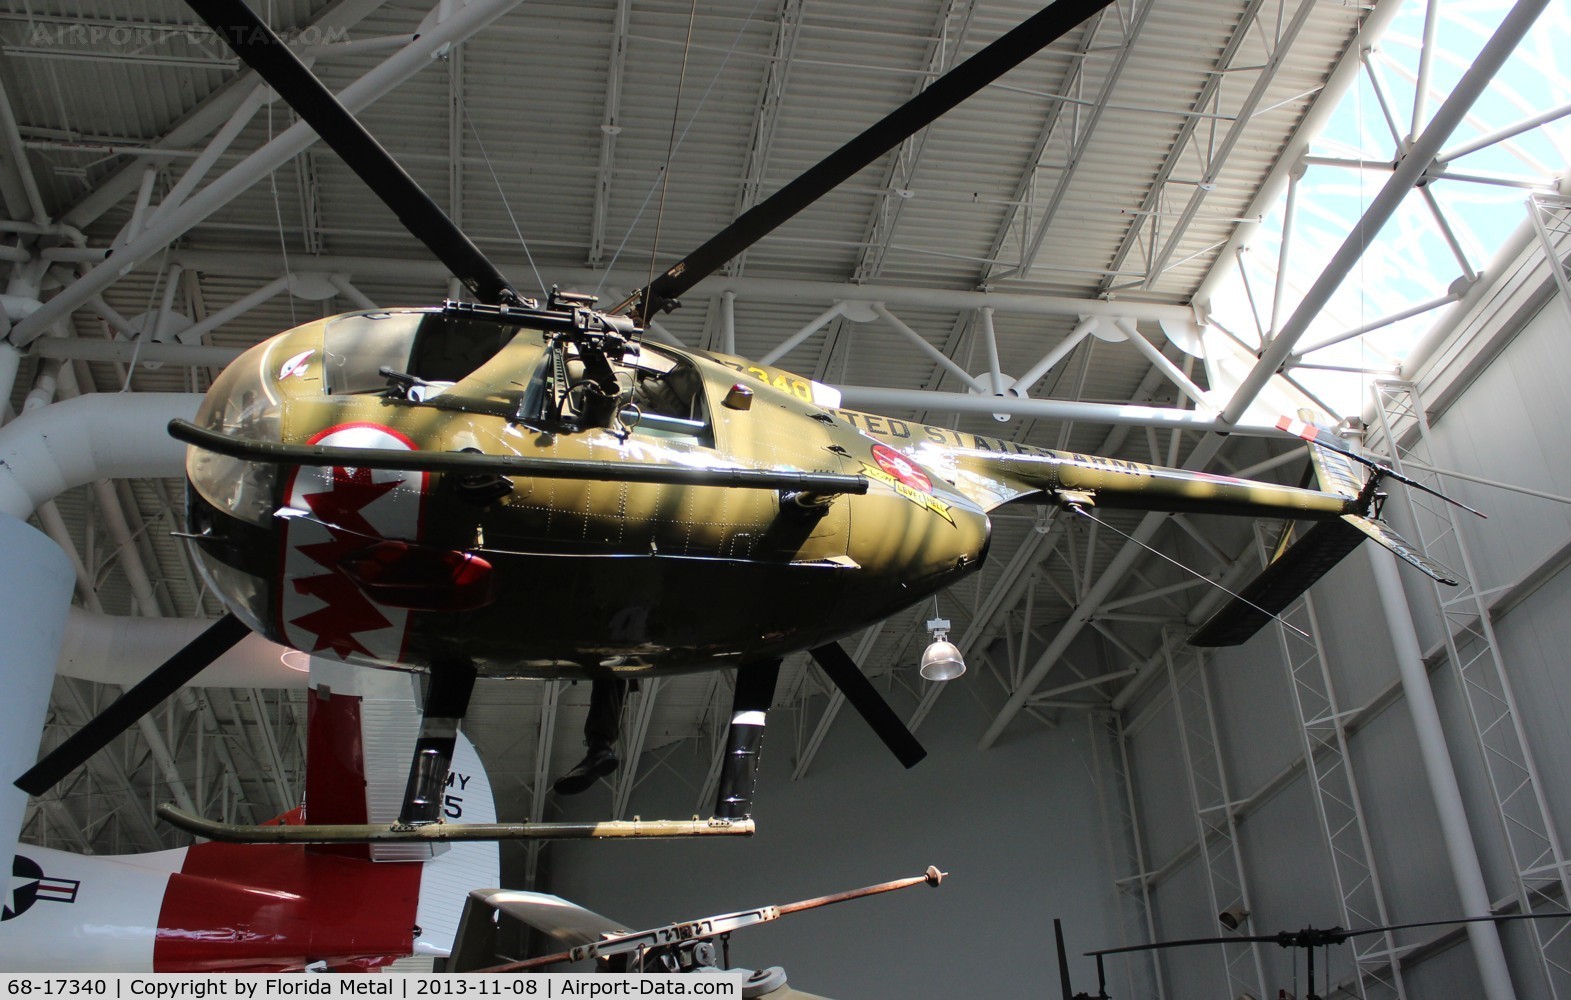 68-17340, 1968 Hughes OH-6A Cayuse C/N 1300, OH-6A at Army Aviation museum